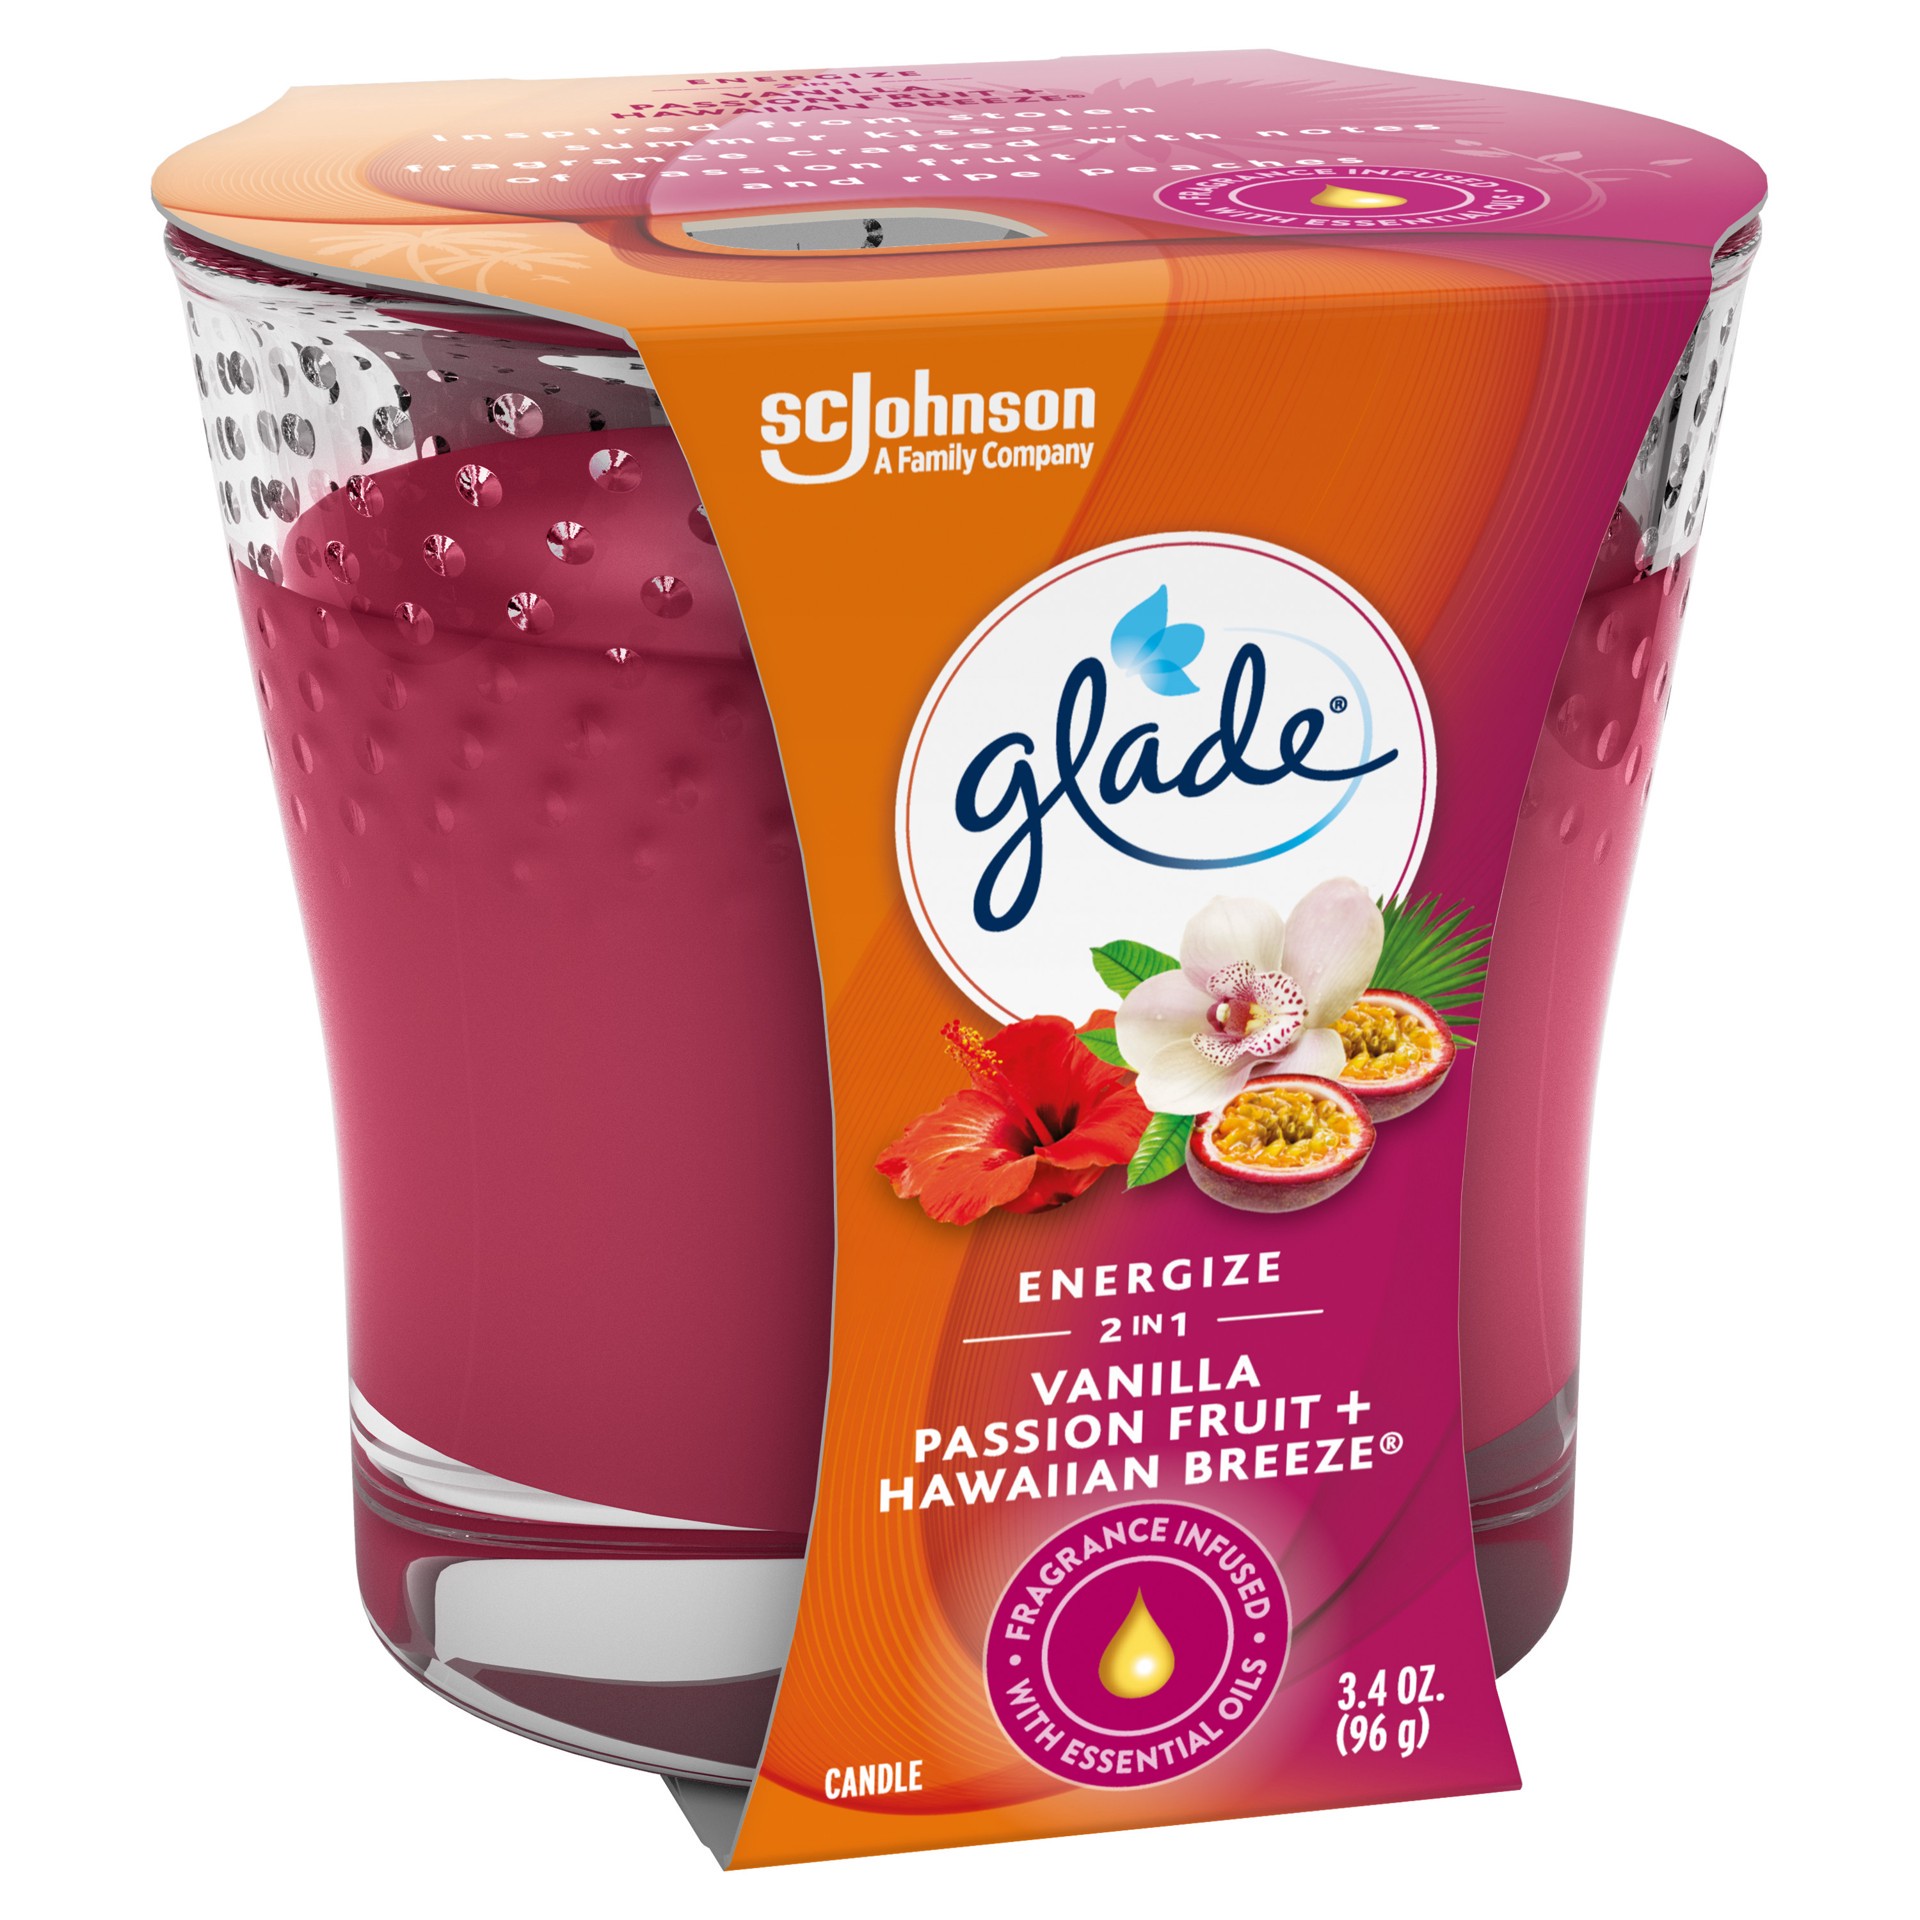 slide 3 of 5, Glade Scented Candle Jar, Vanilla Passion Fruit & Hawaiian Breeze 2-in-1, Fragrance Infused with Essential Oils, 3.4 oz, 3.4 oz